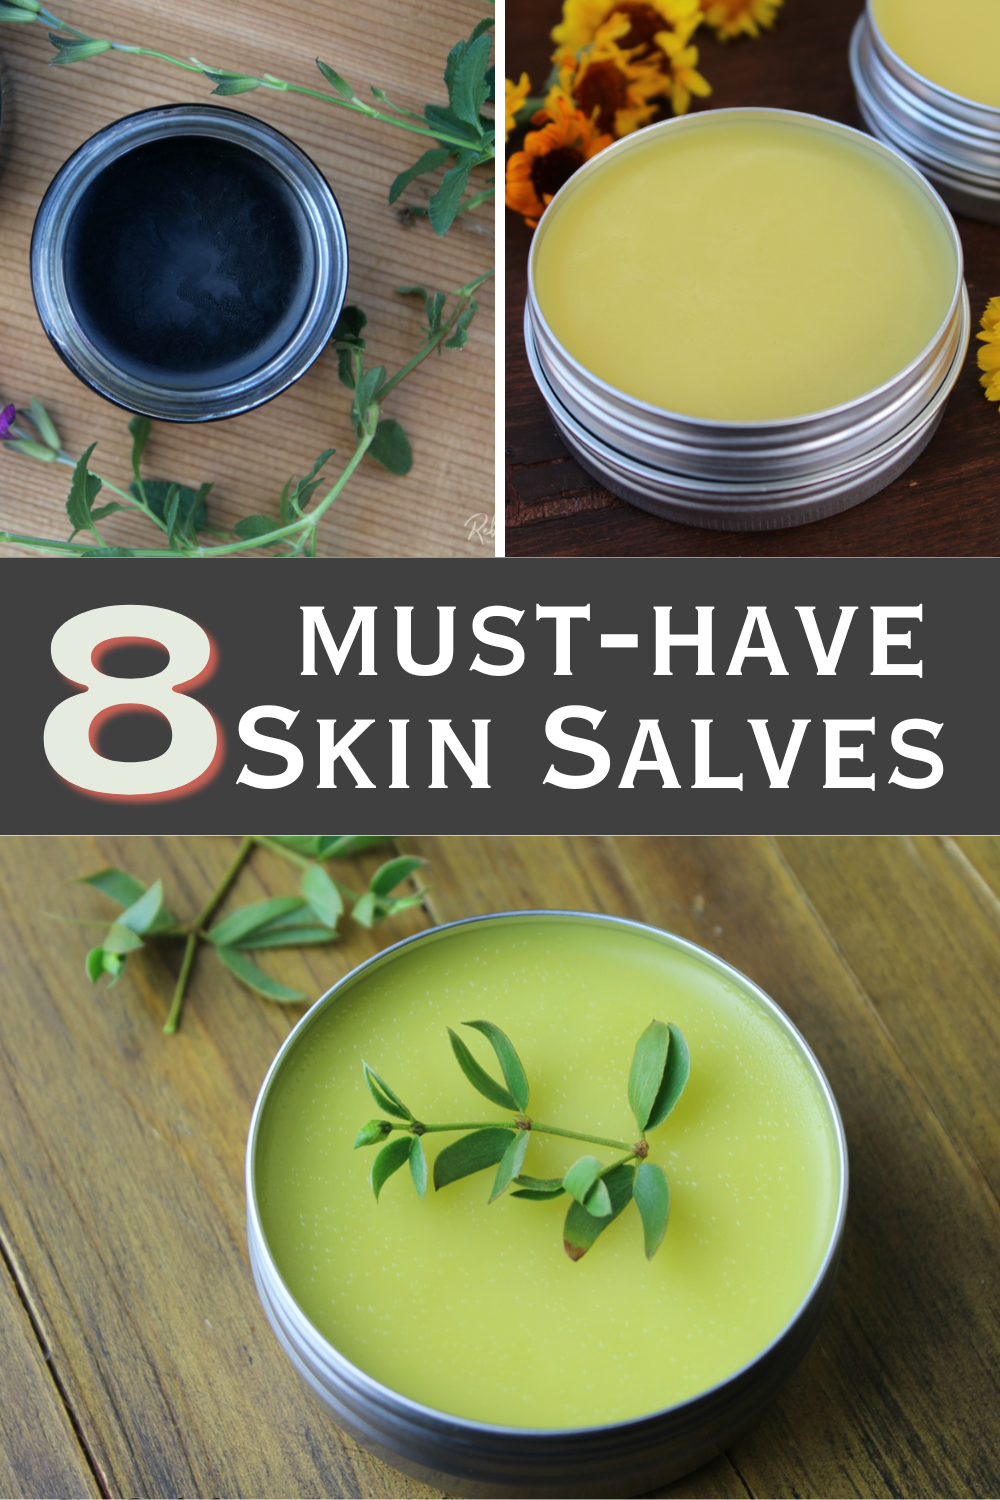 8 of the best must-have skincare salves to support healing and healthy skin in a variety of areas. Learn how to make them at home, today!